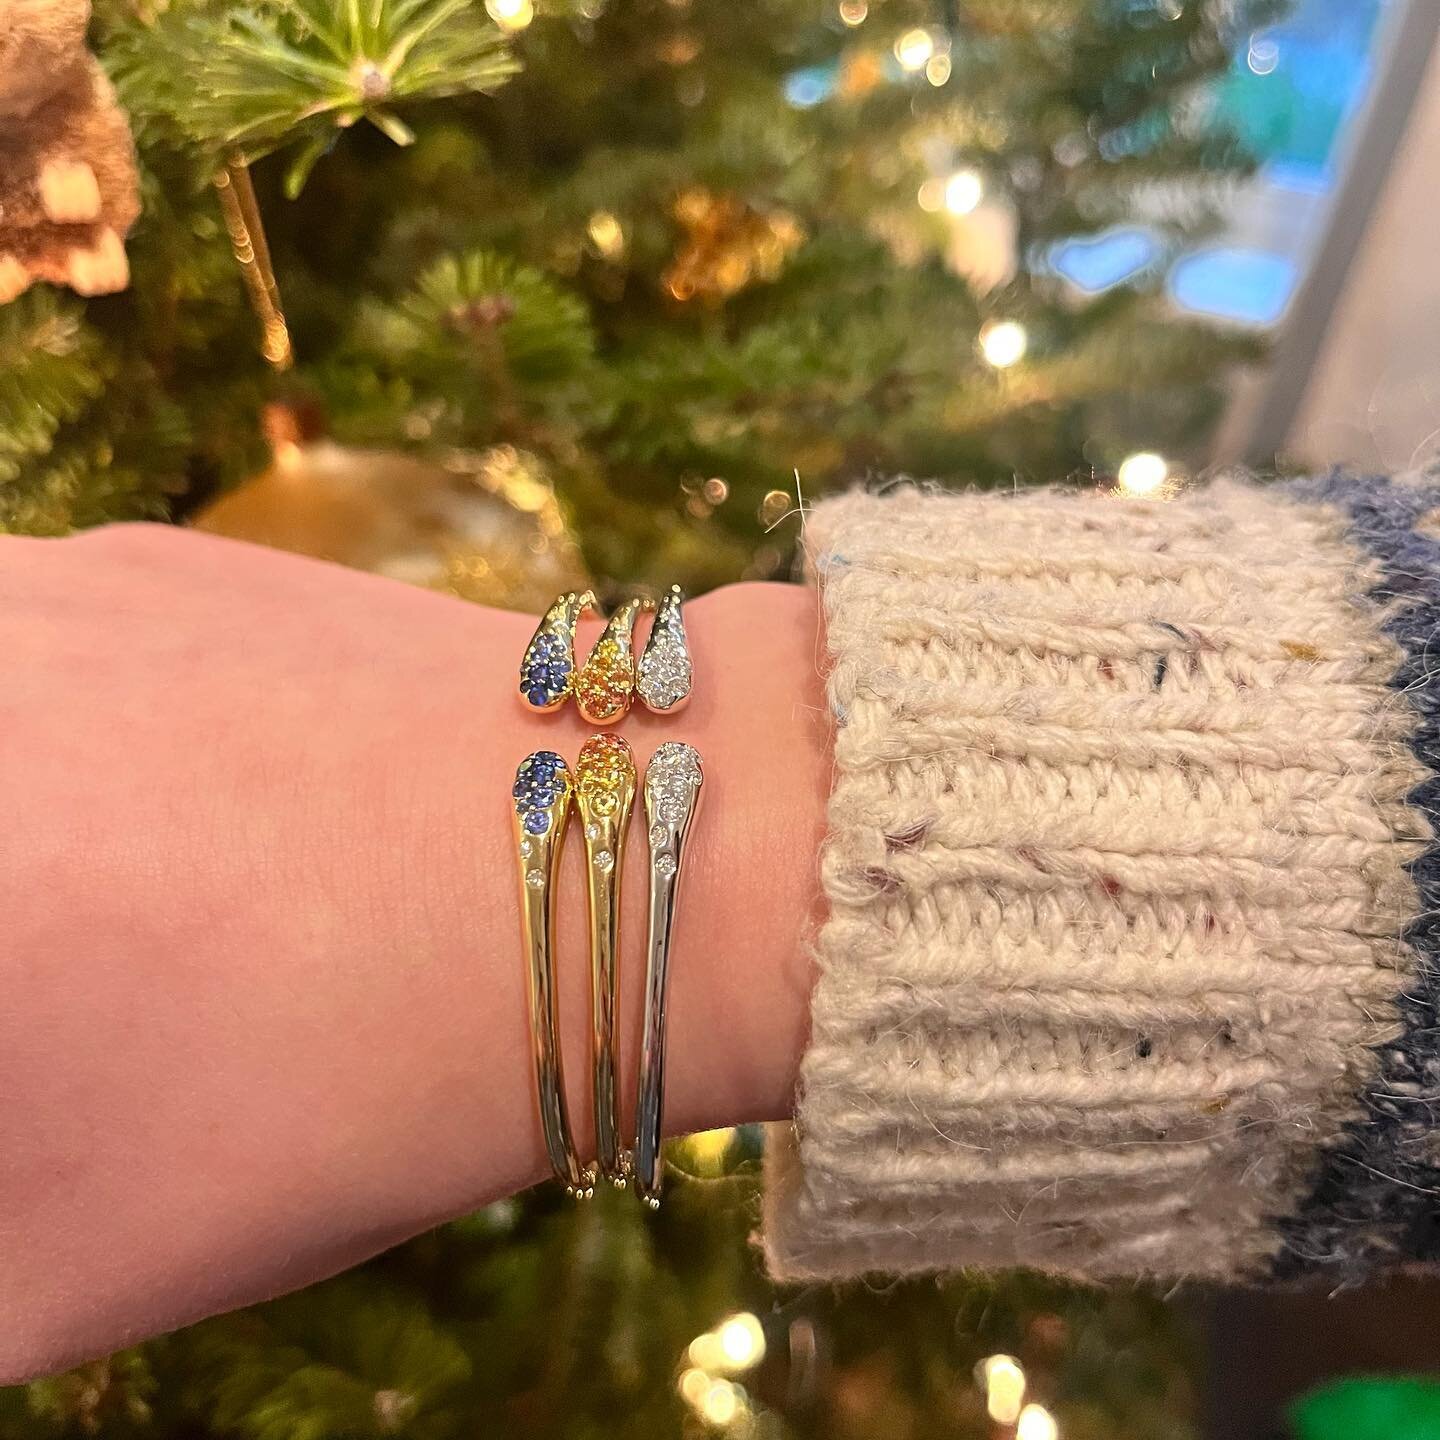 Beautiful bangles! Flexible ombr&eacute; bangles in sapphire, diamond and yellow and orange sapphire 🧡 And more stacking tubogas- flexible bangle, willow cuff with diamonds and half round bangle. Wednesday is the last day to ship for Christmas 🎄 an